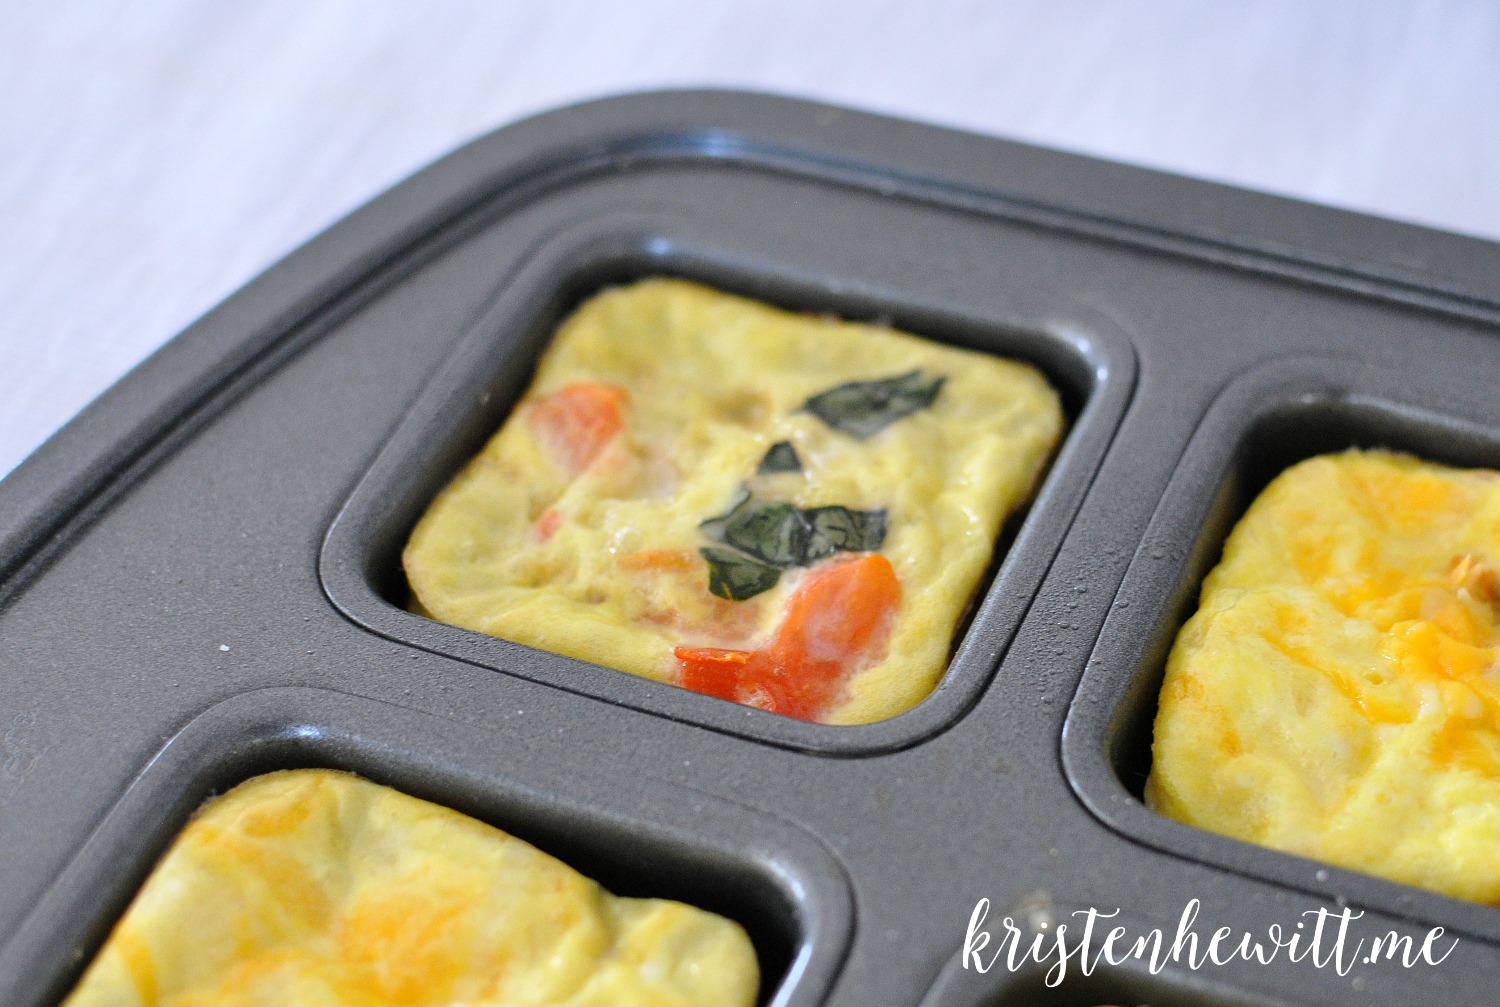 Family and Food: Mini Omlette in Pampered Chef Square Brownie Pan   Pampered chef brownie pan, Pampered chef recipes, Pampered chef brownie pan  recipes